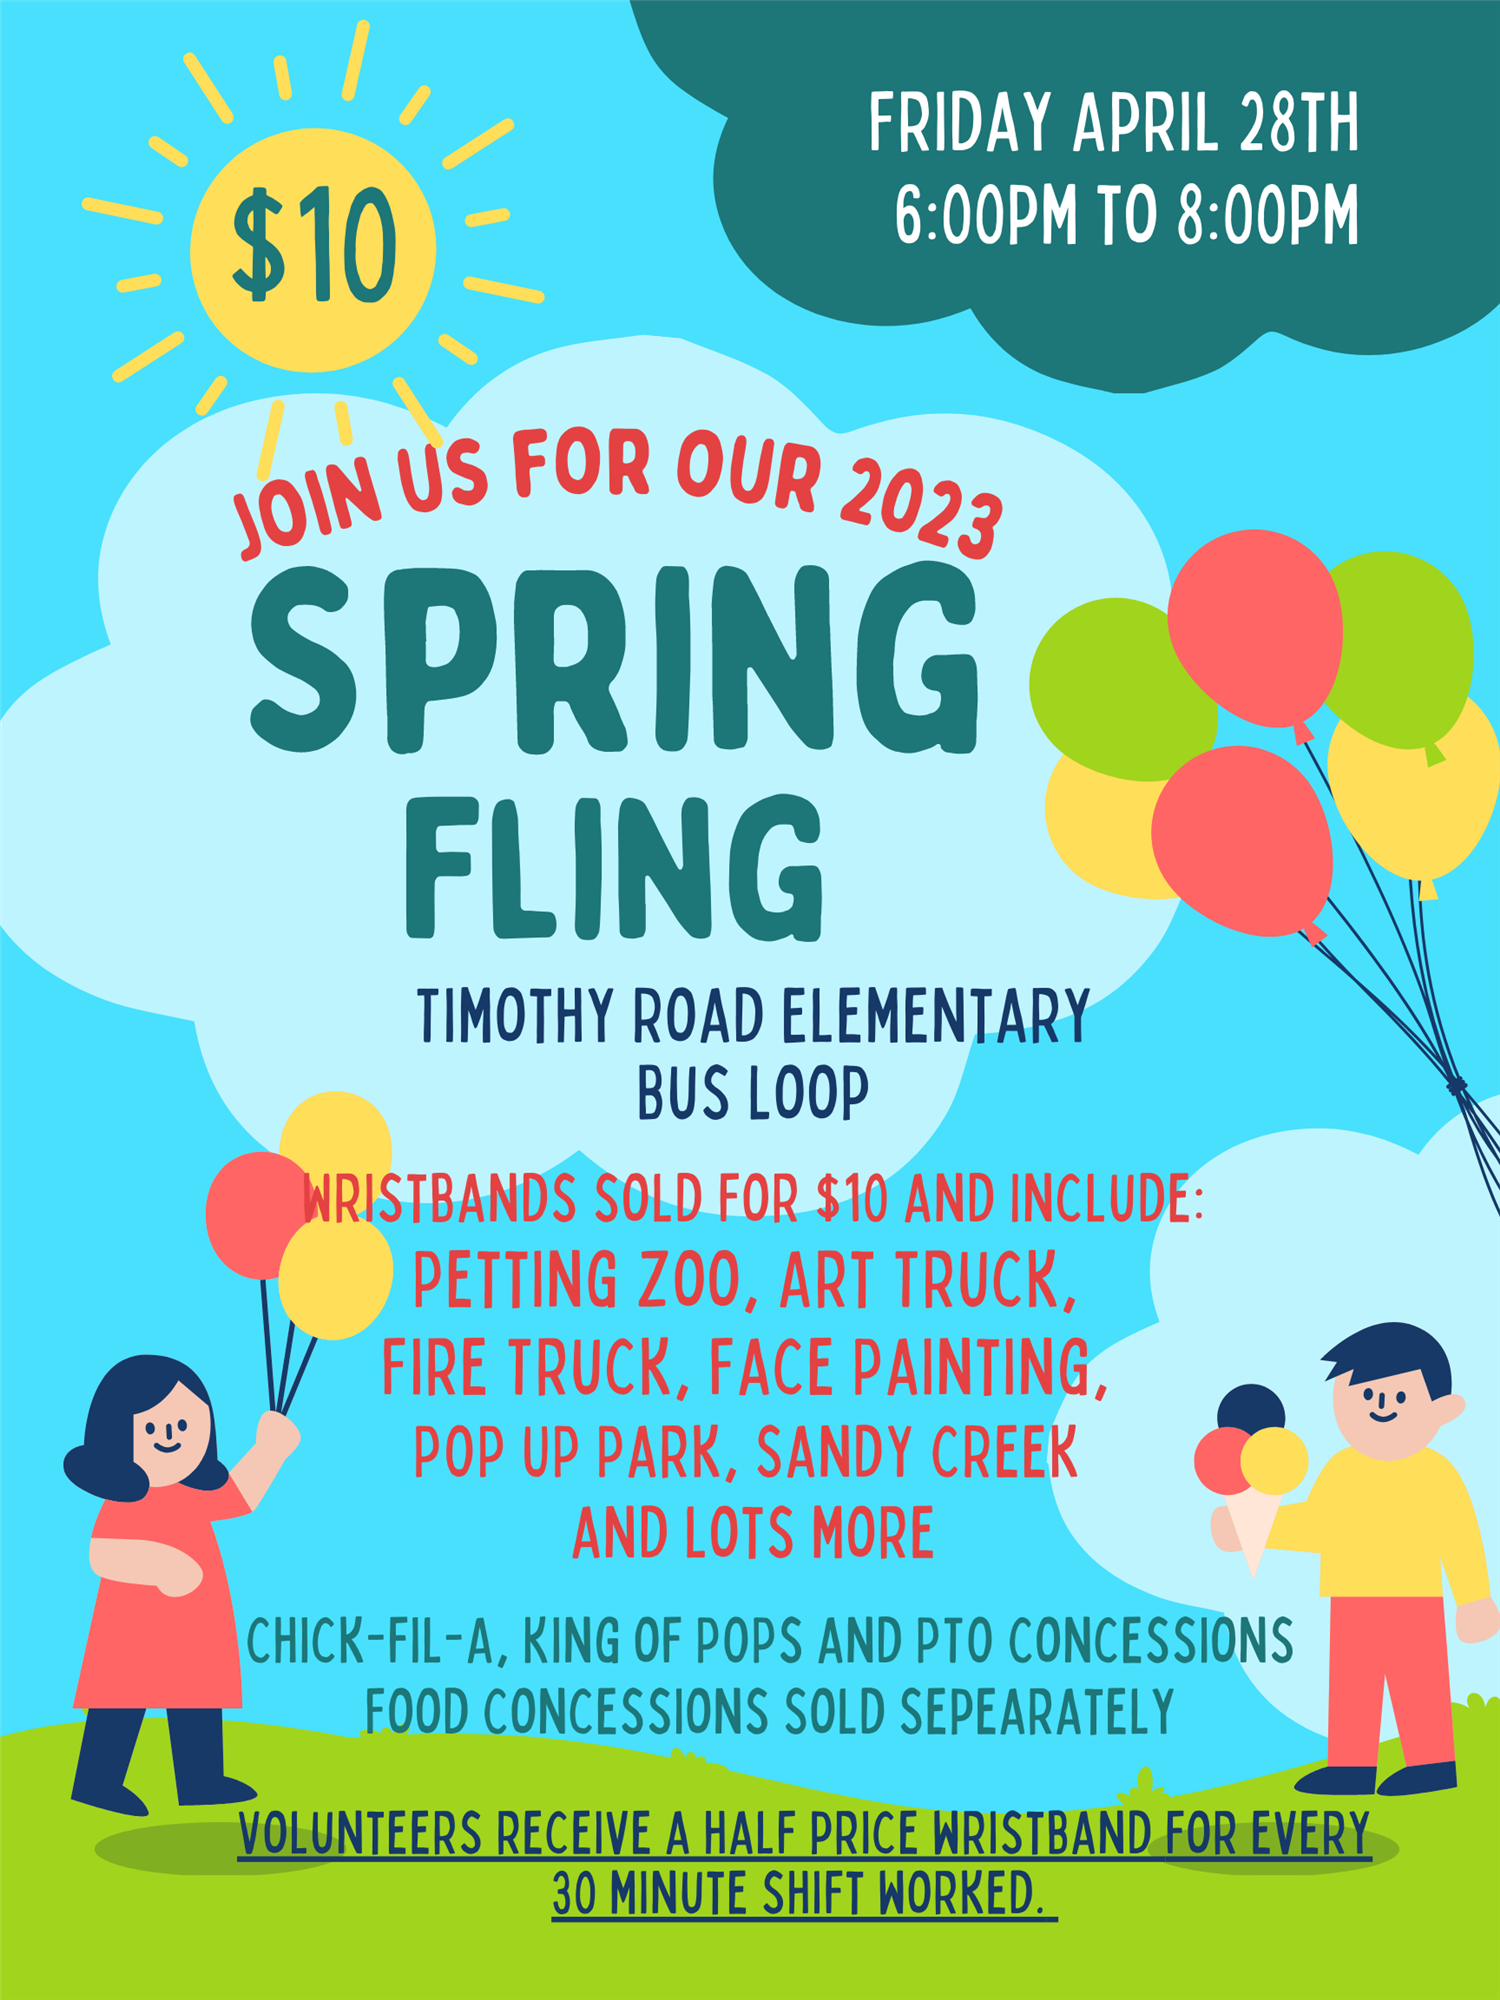 Join us for our Spring Fling April 28th! Sign up to volunteer at https://www.signupgenius.com/go/20F0845AAA62DAB9-spring2